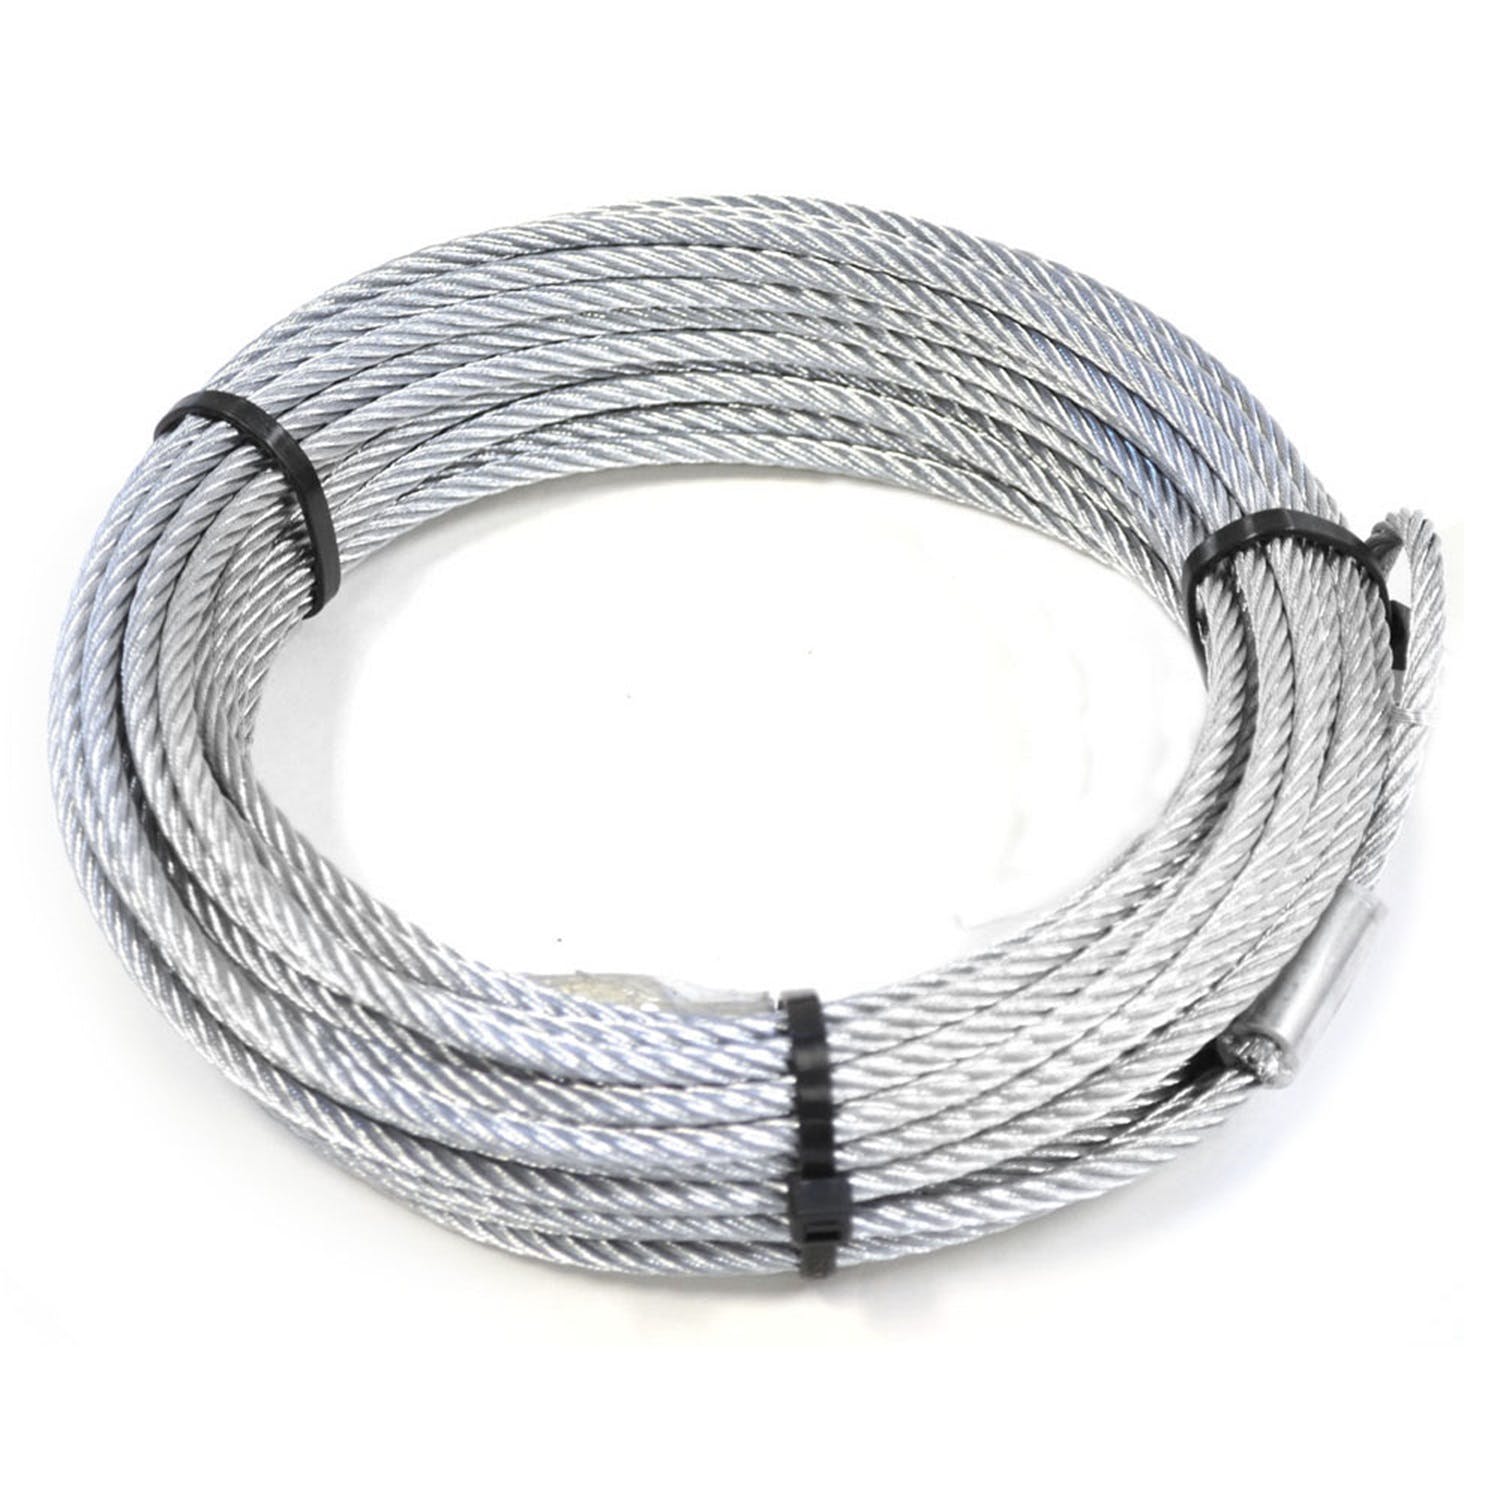 WARN 15236 Wire Rope 3/16x50